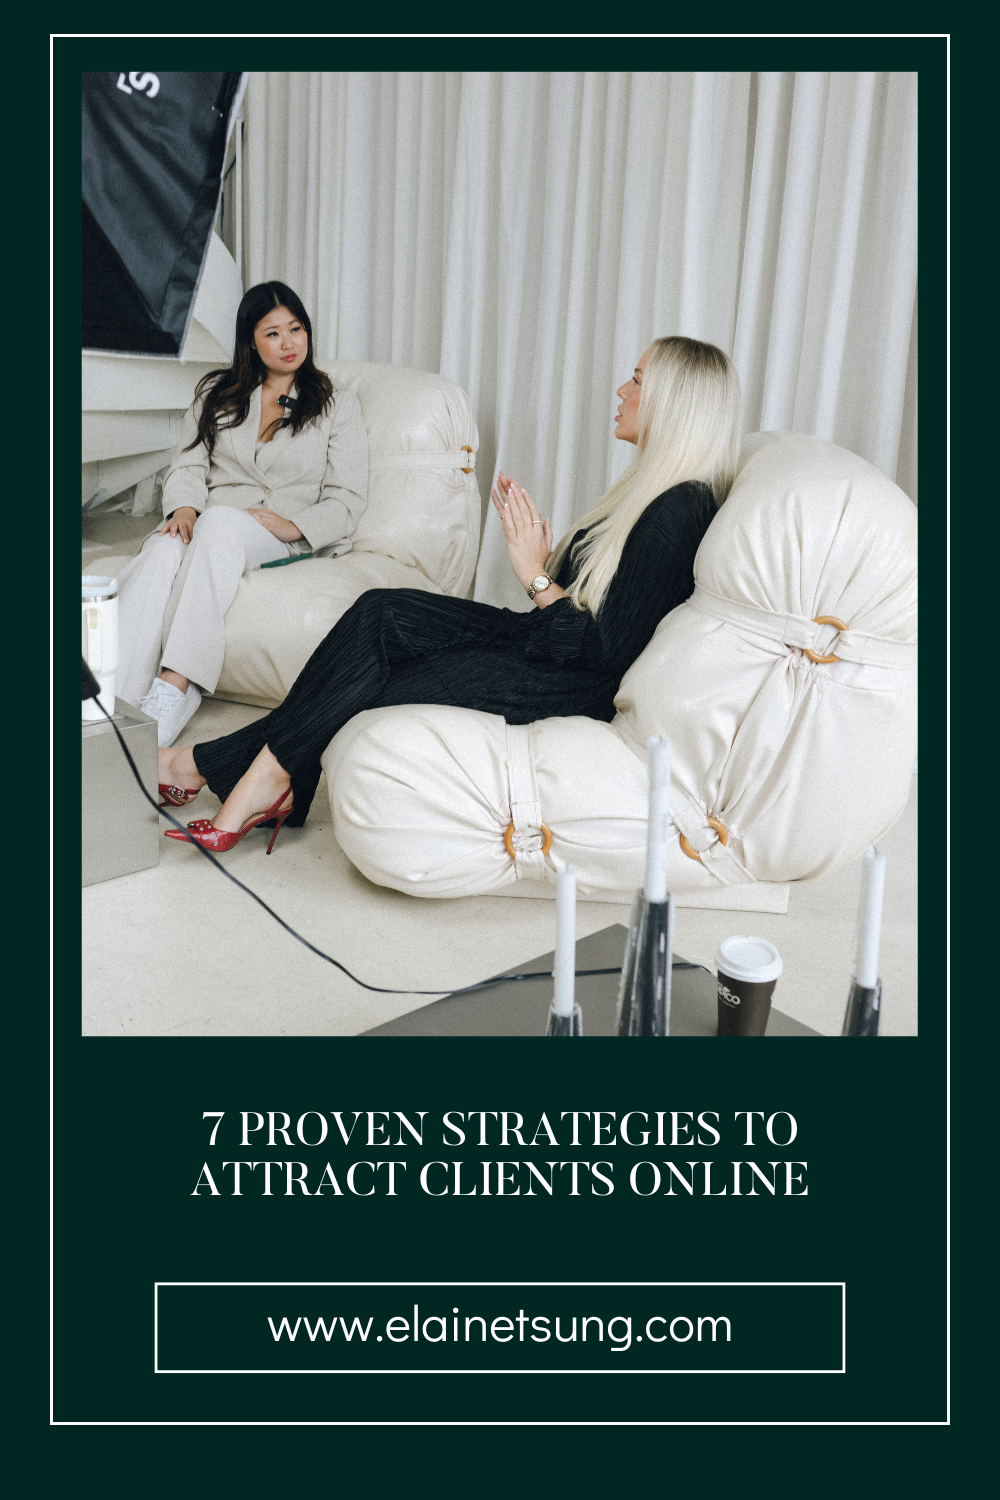 attract clients online